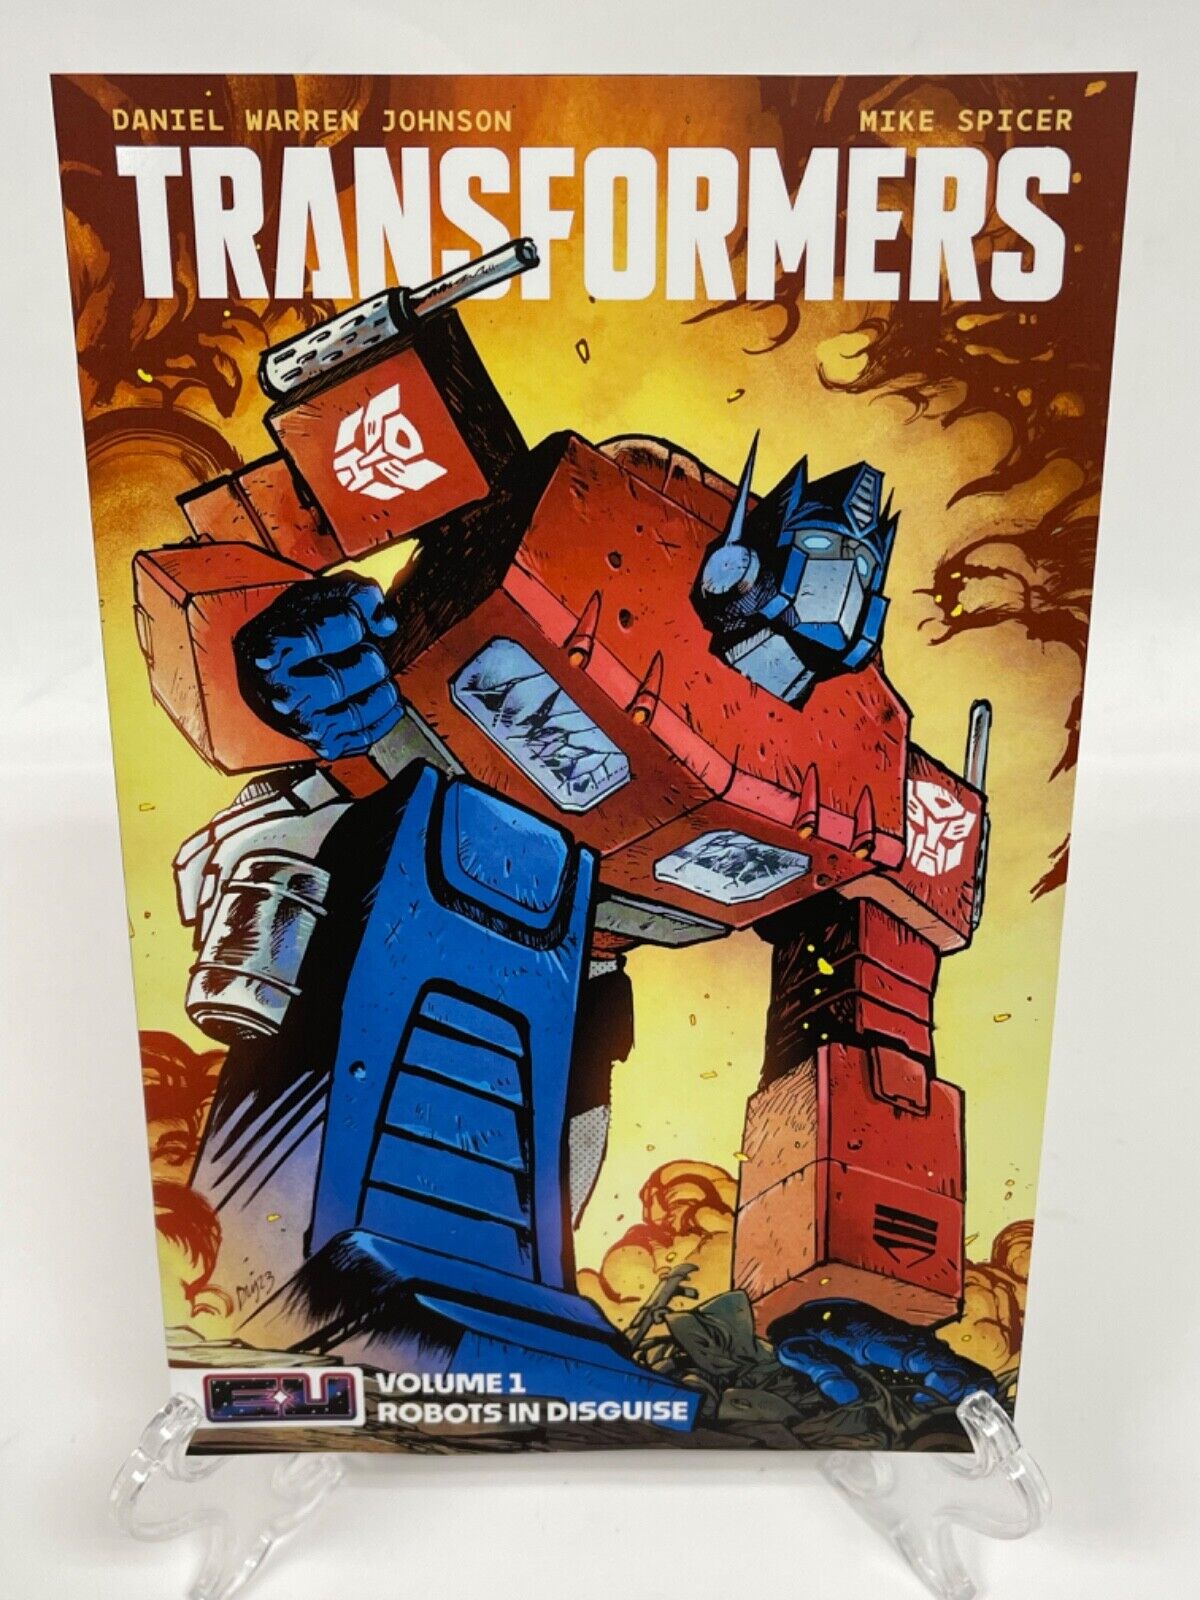 Transformers Volume 1 Robots in Disguise Collects #1-6 New Image Comics TPB